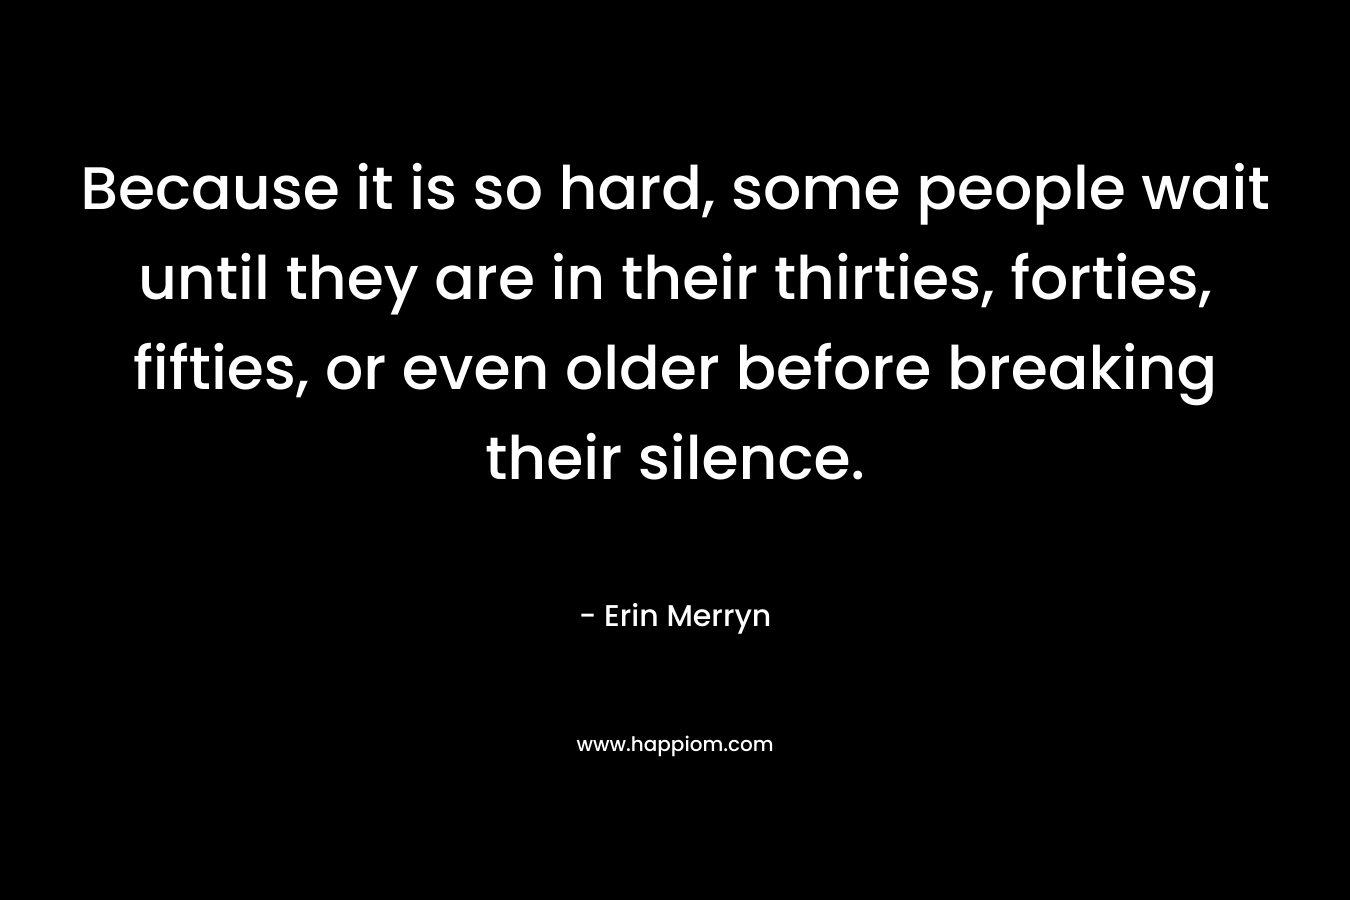 Because it is so hard, some people wait until they are in their thirties, forties, fifties, or even older before breaking their silence. – Erin Merryn